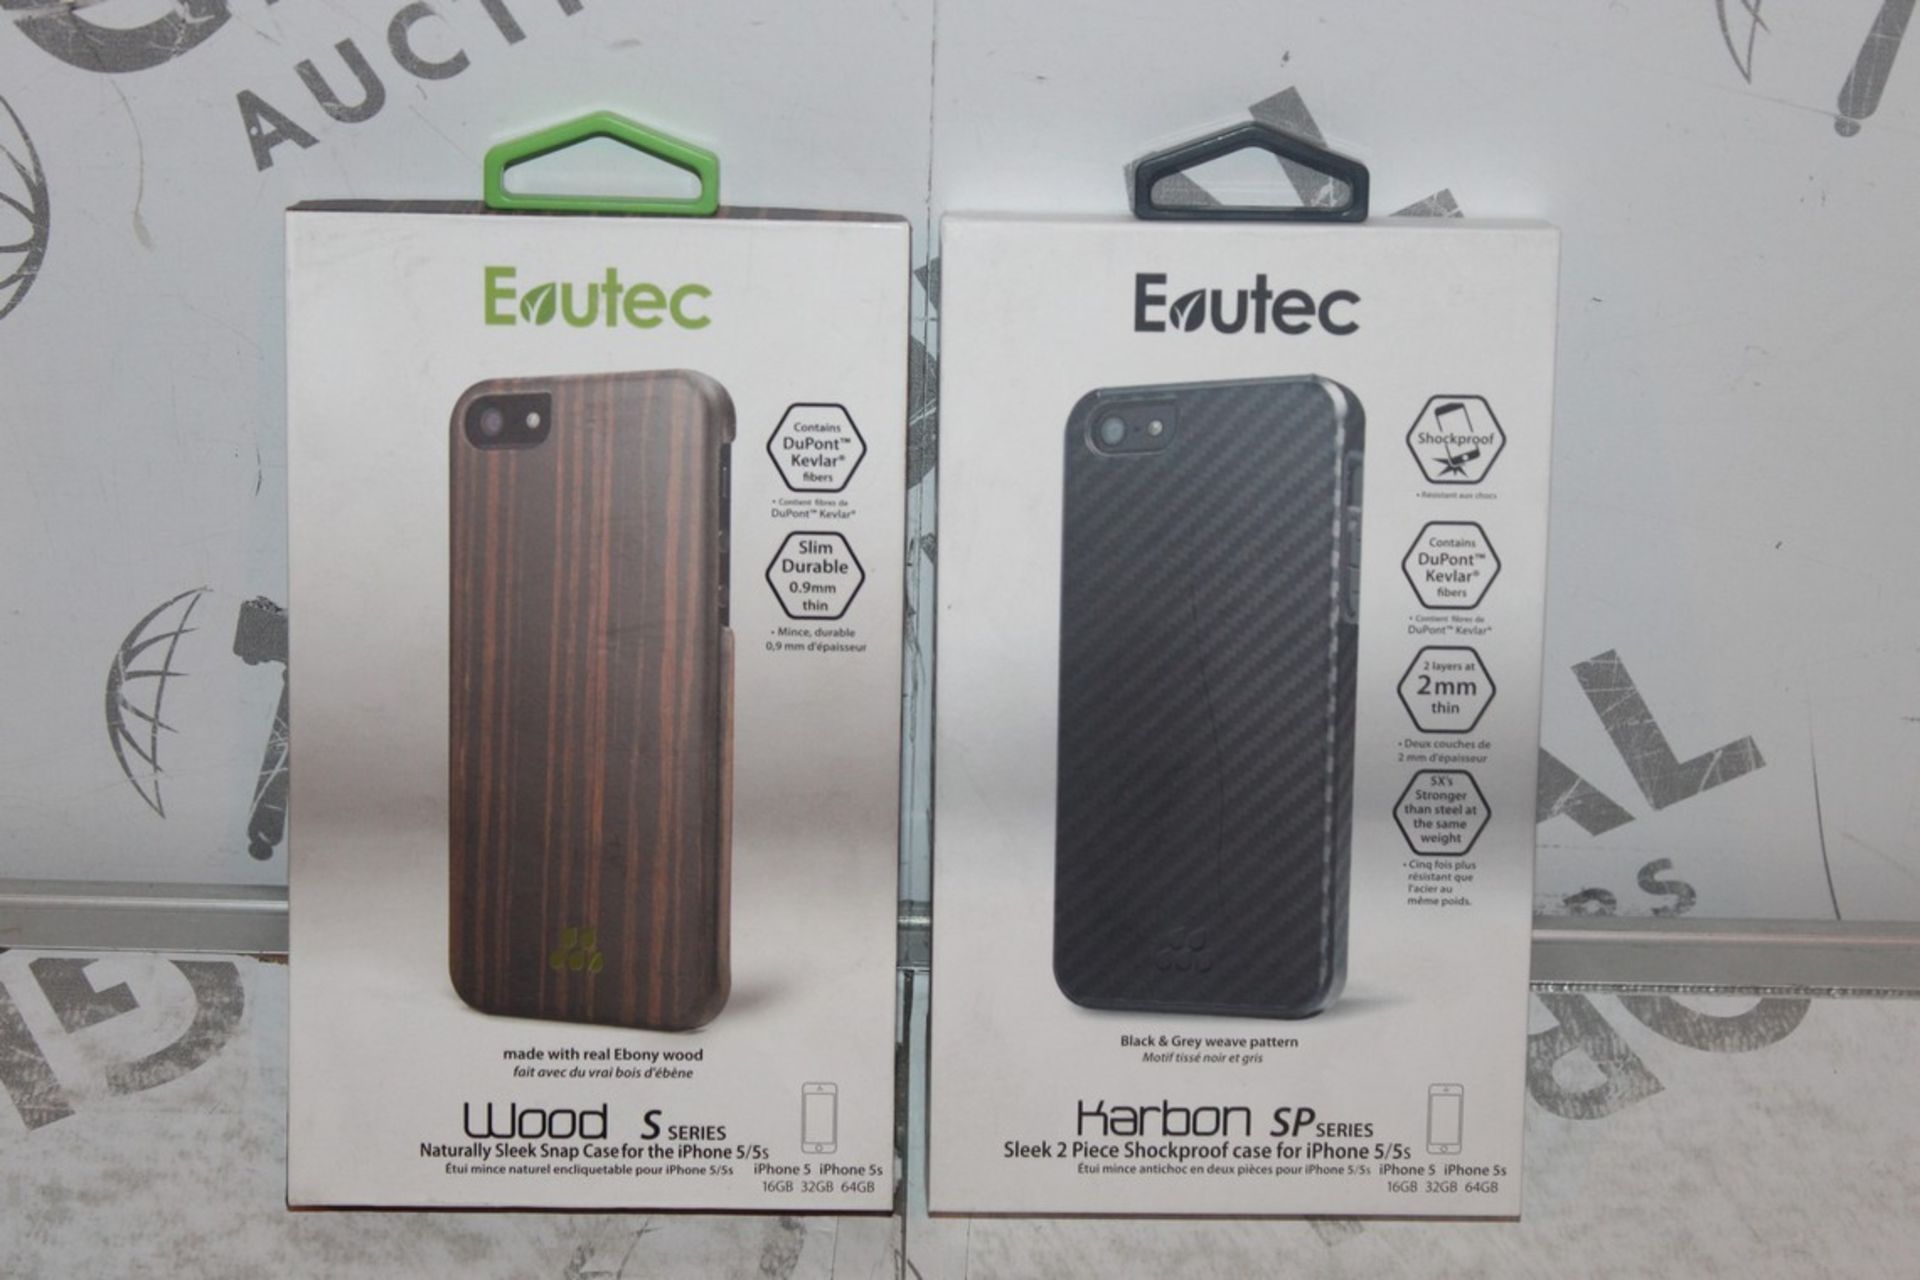 Lot to Contain 10 Brand New Evutec Phone Cases for Assorted iPhone to Include Carbon Fibre iPhone